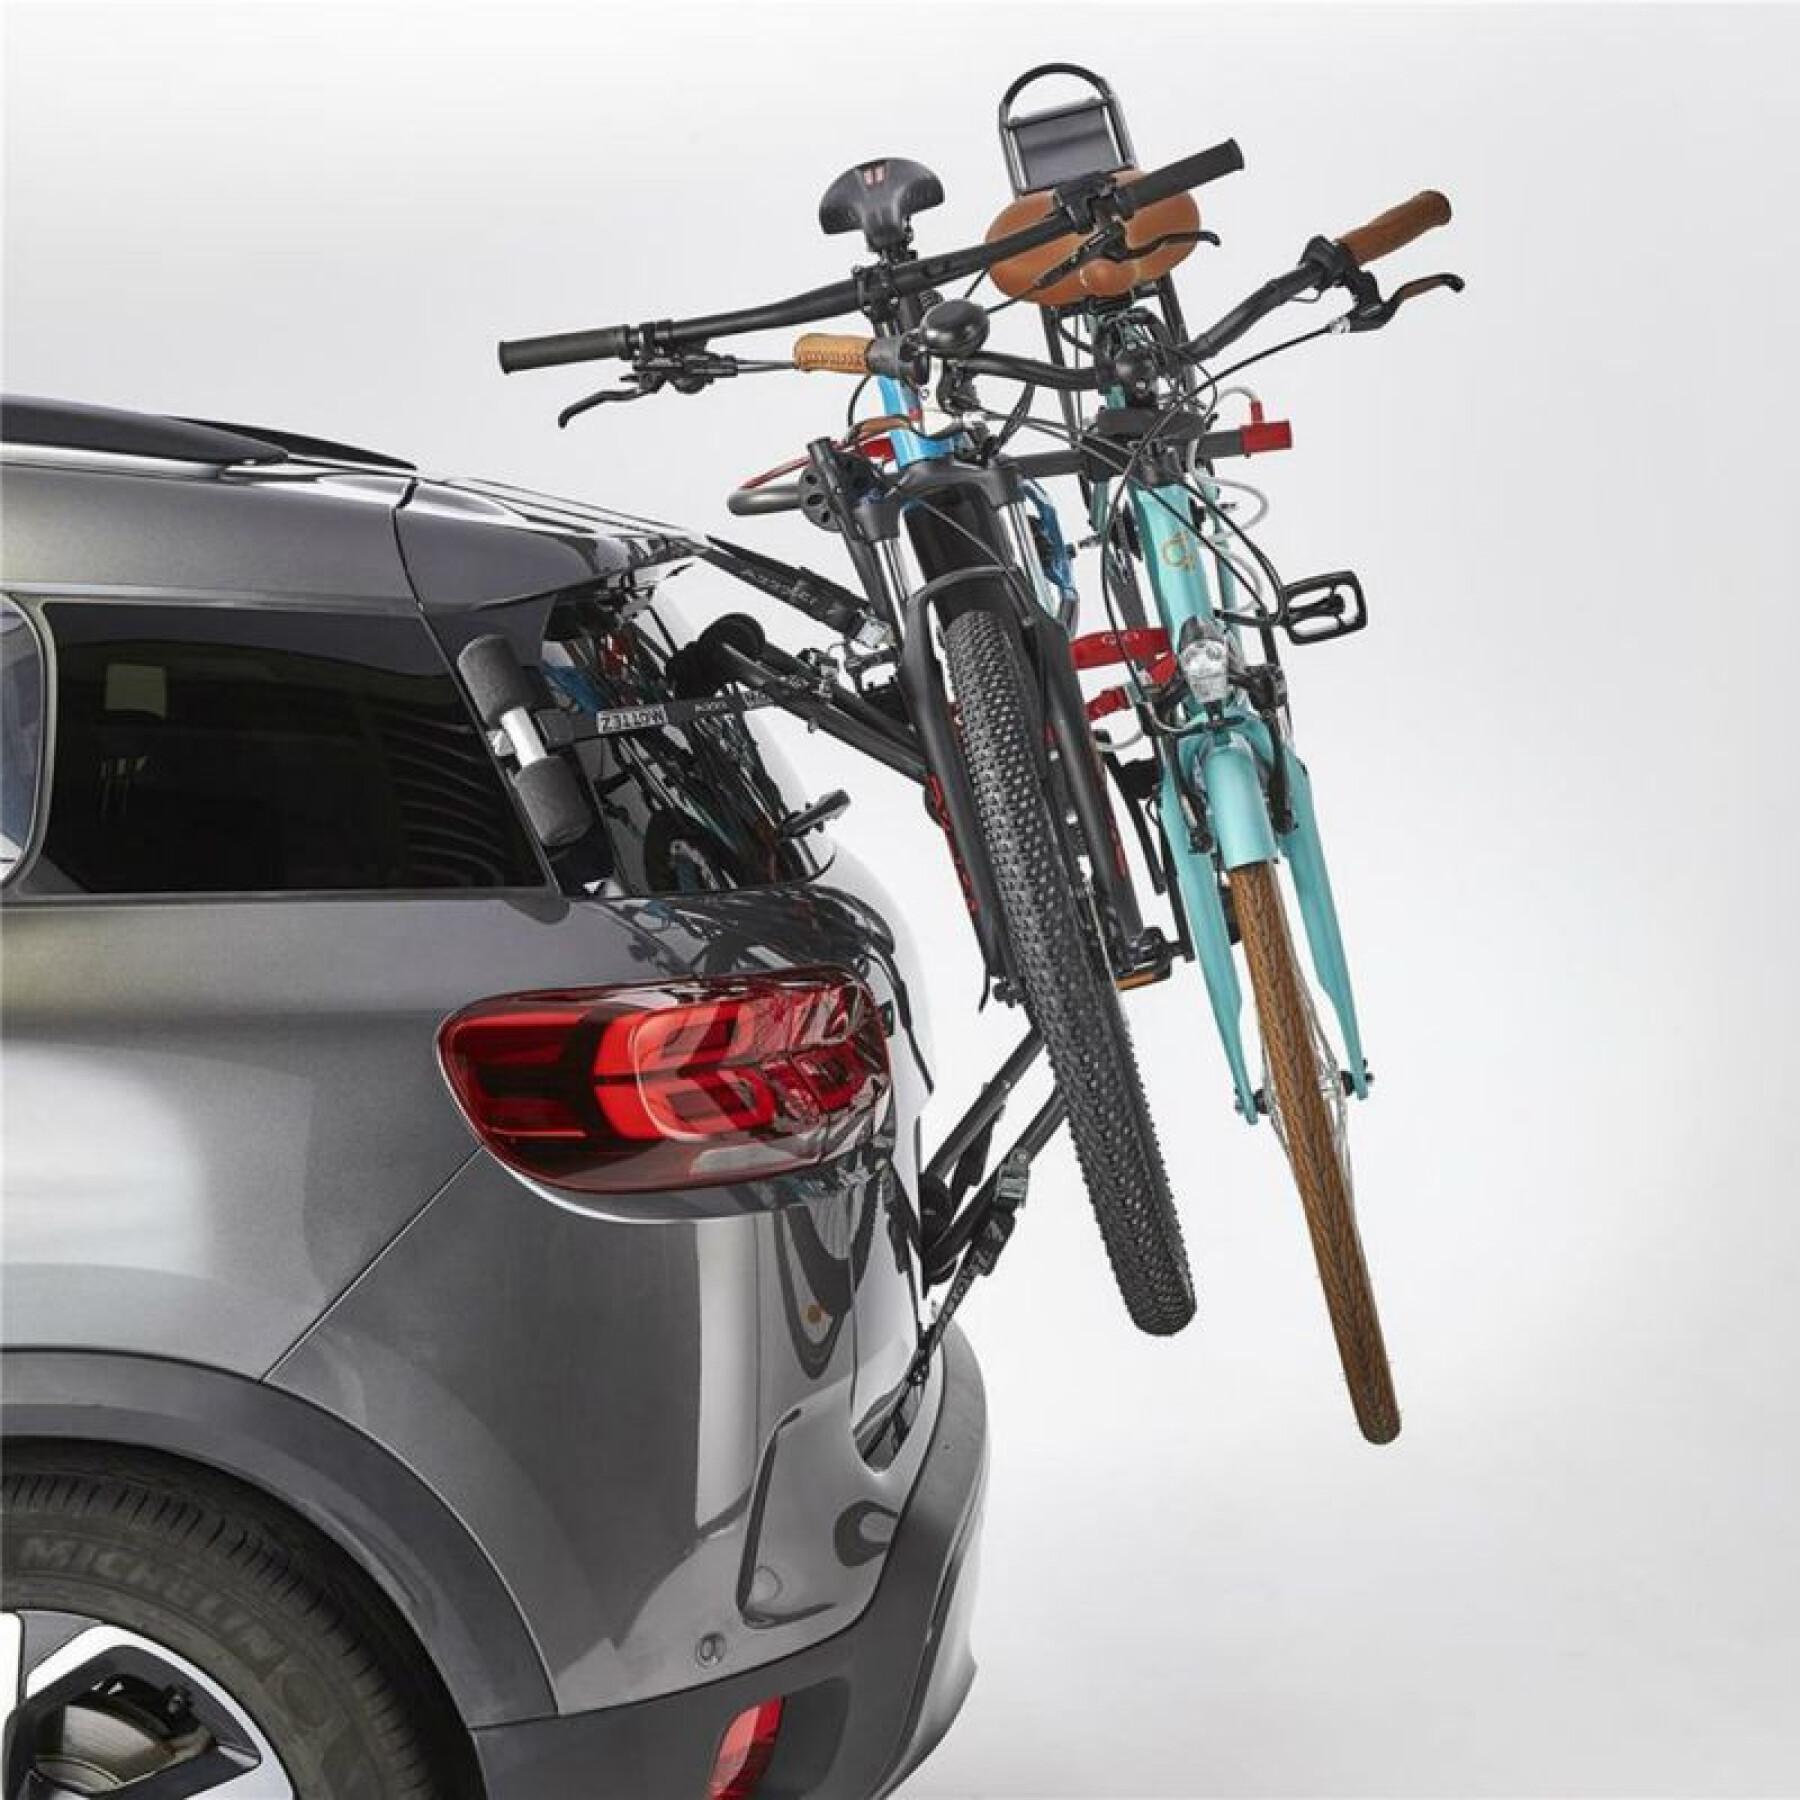 Bike carrier for 2 bikes with space for anti-theft device - homologated for 2 bikes - remember to remove the battery Mottez shiva-2